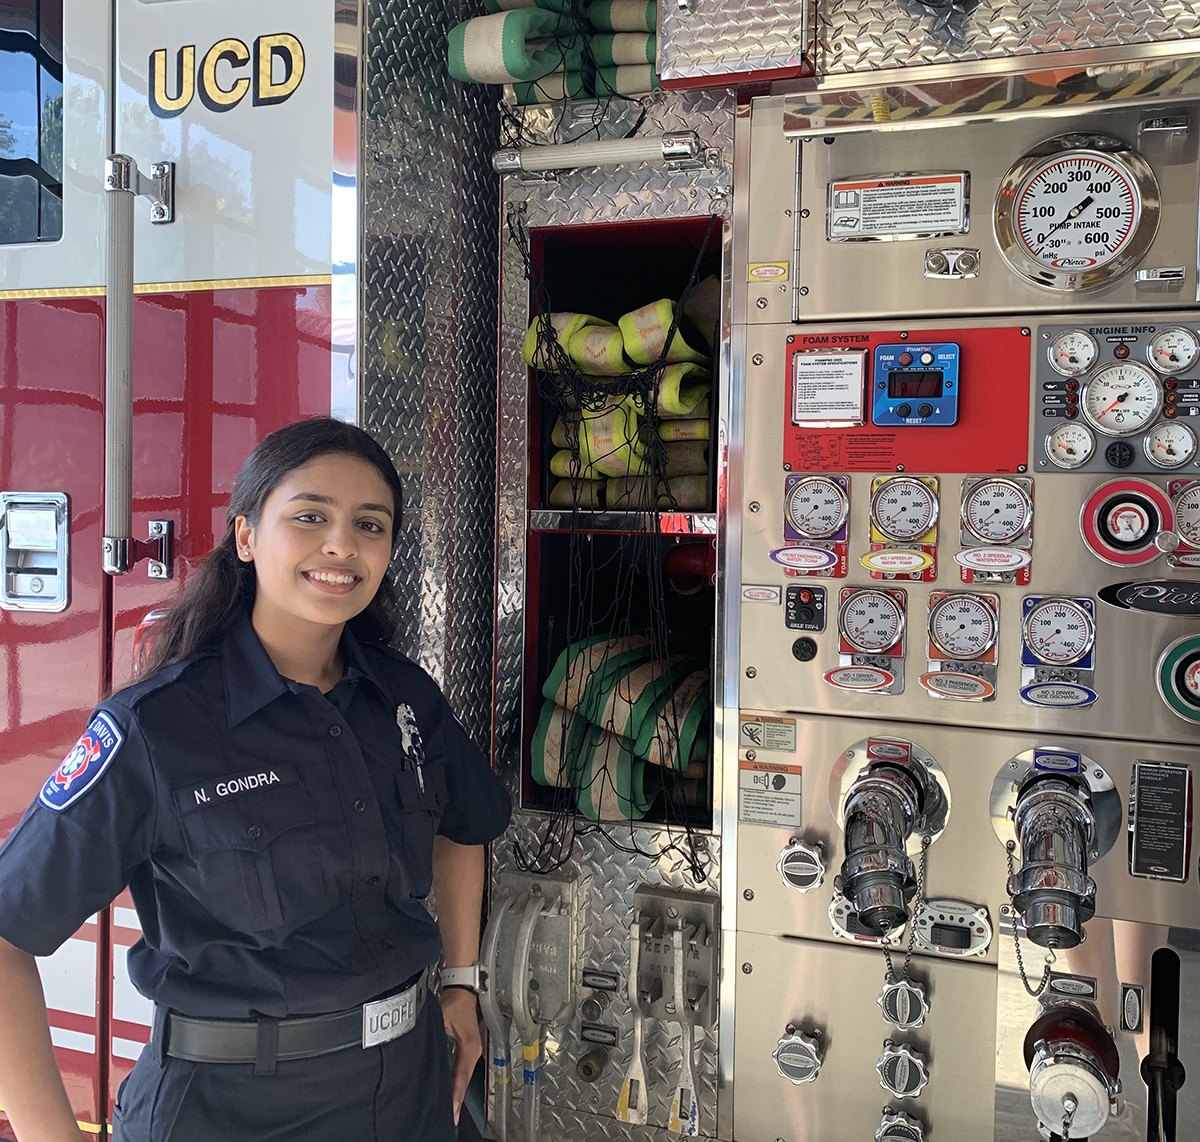 Neha Gondra in front of a fire truck